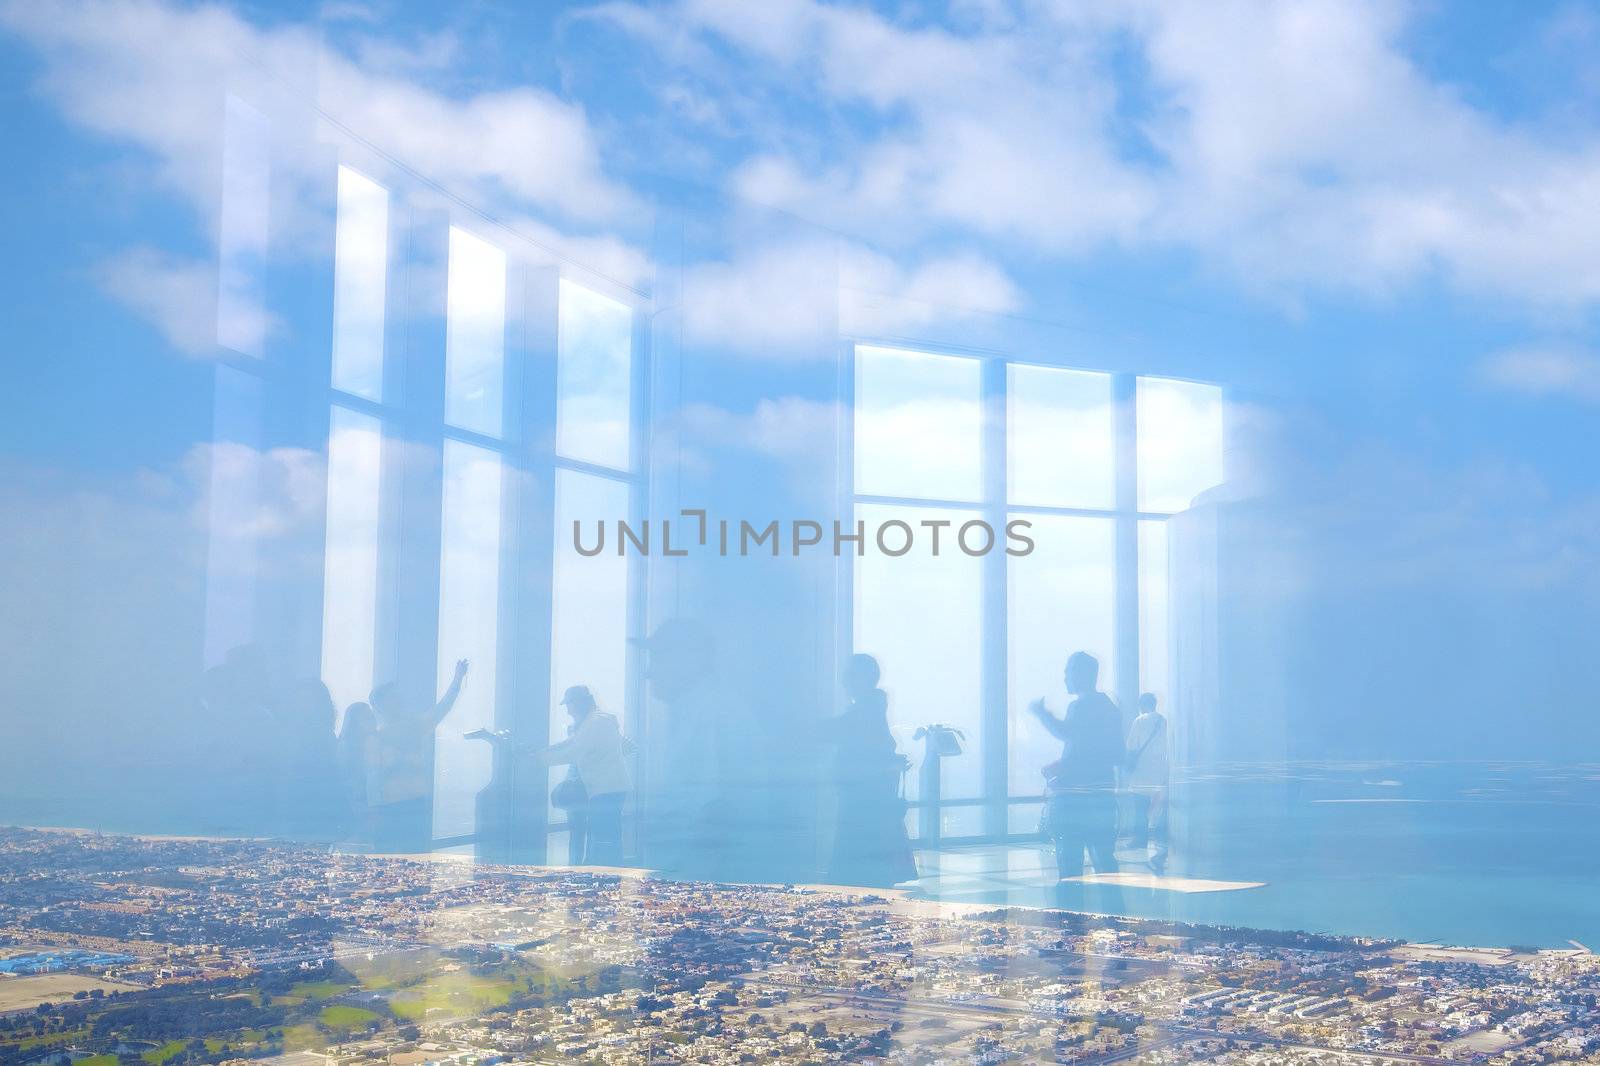 Reflection of people standing on an observation deck looking out on Dubai city